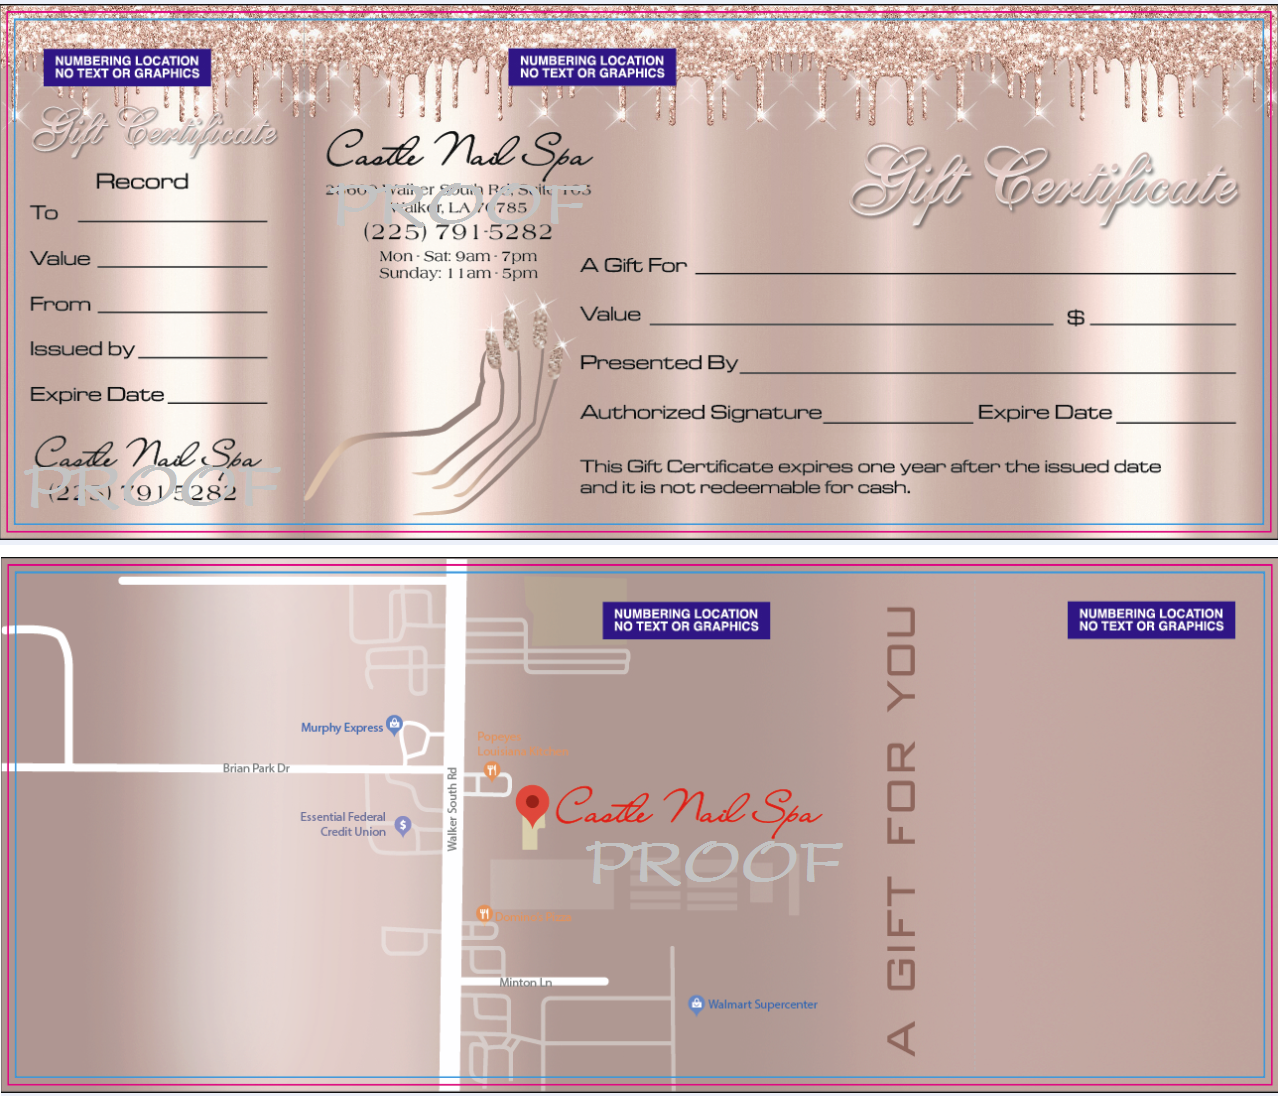 Picture of Gift Certificates 001